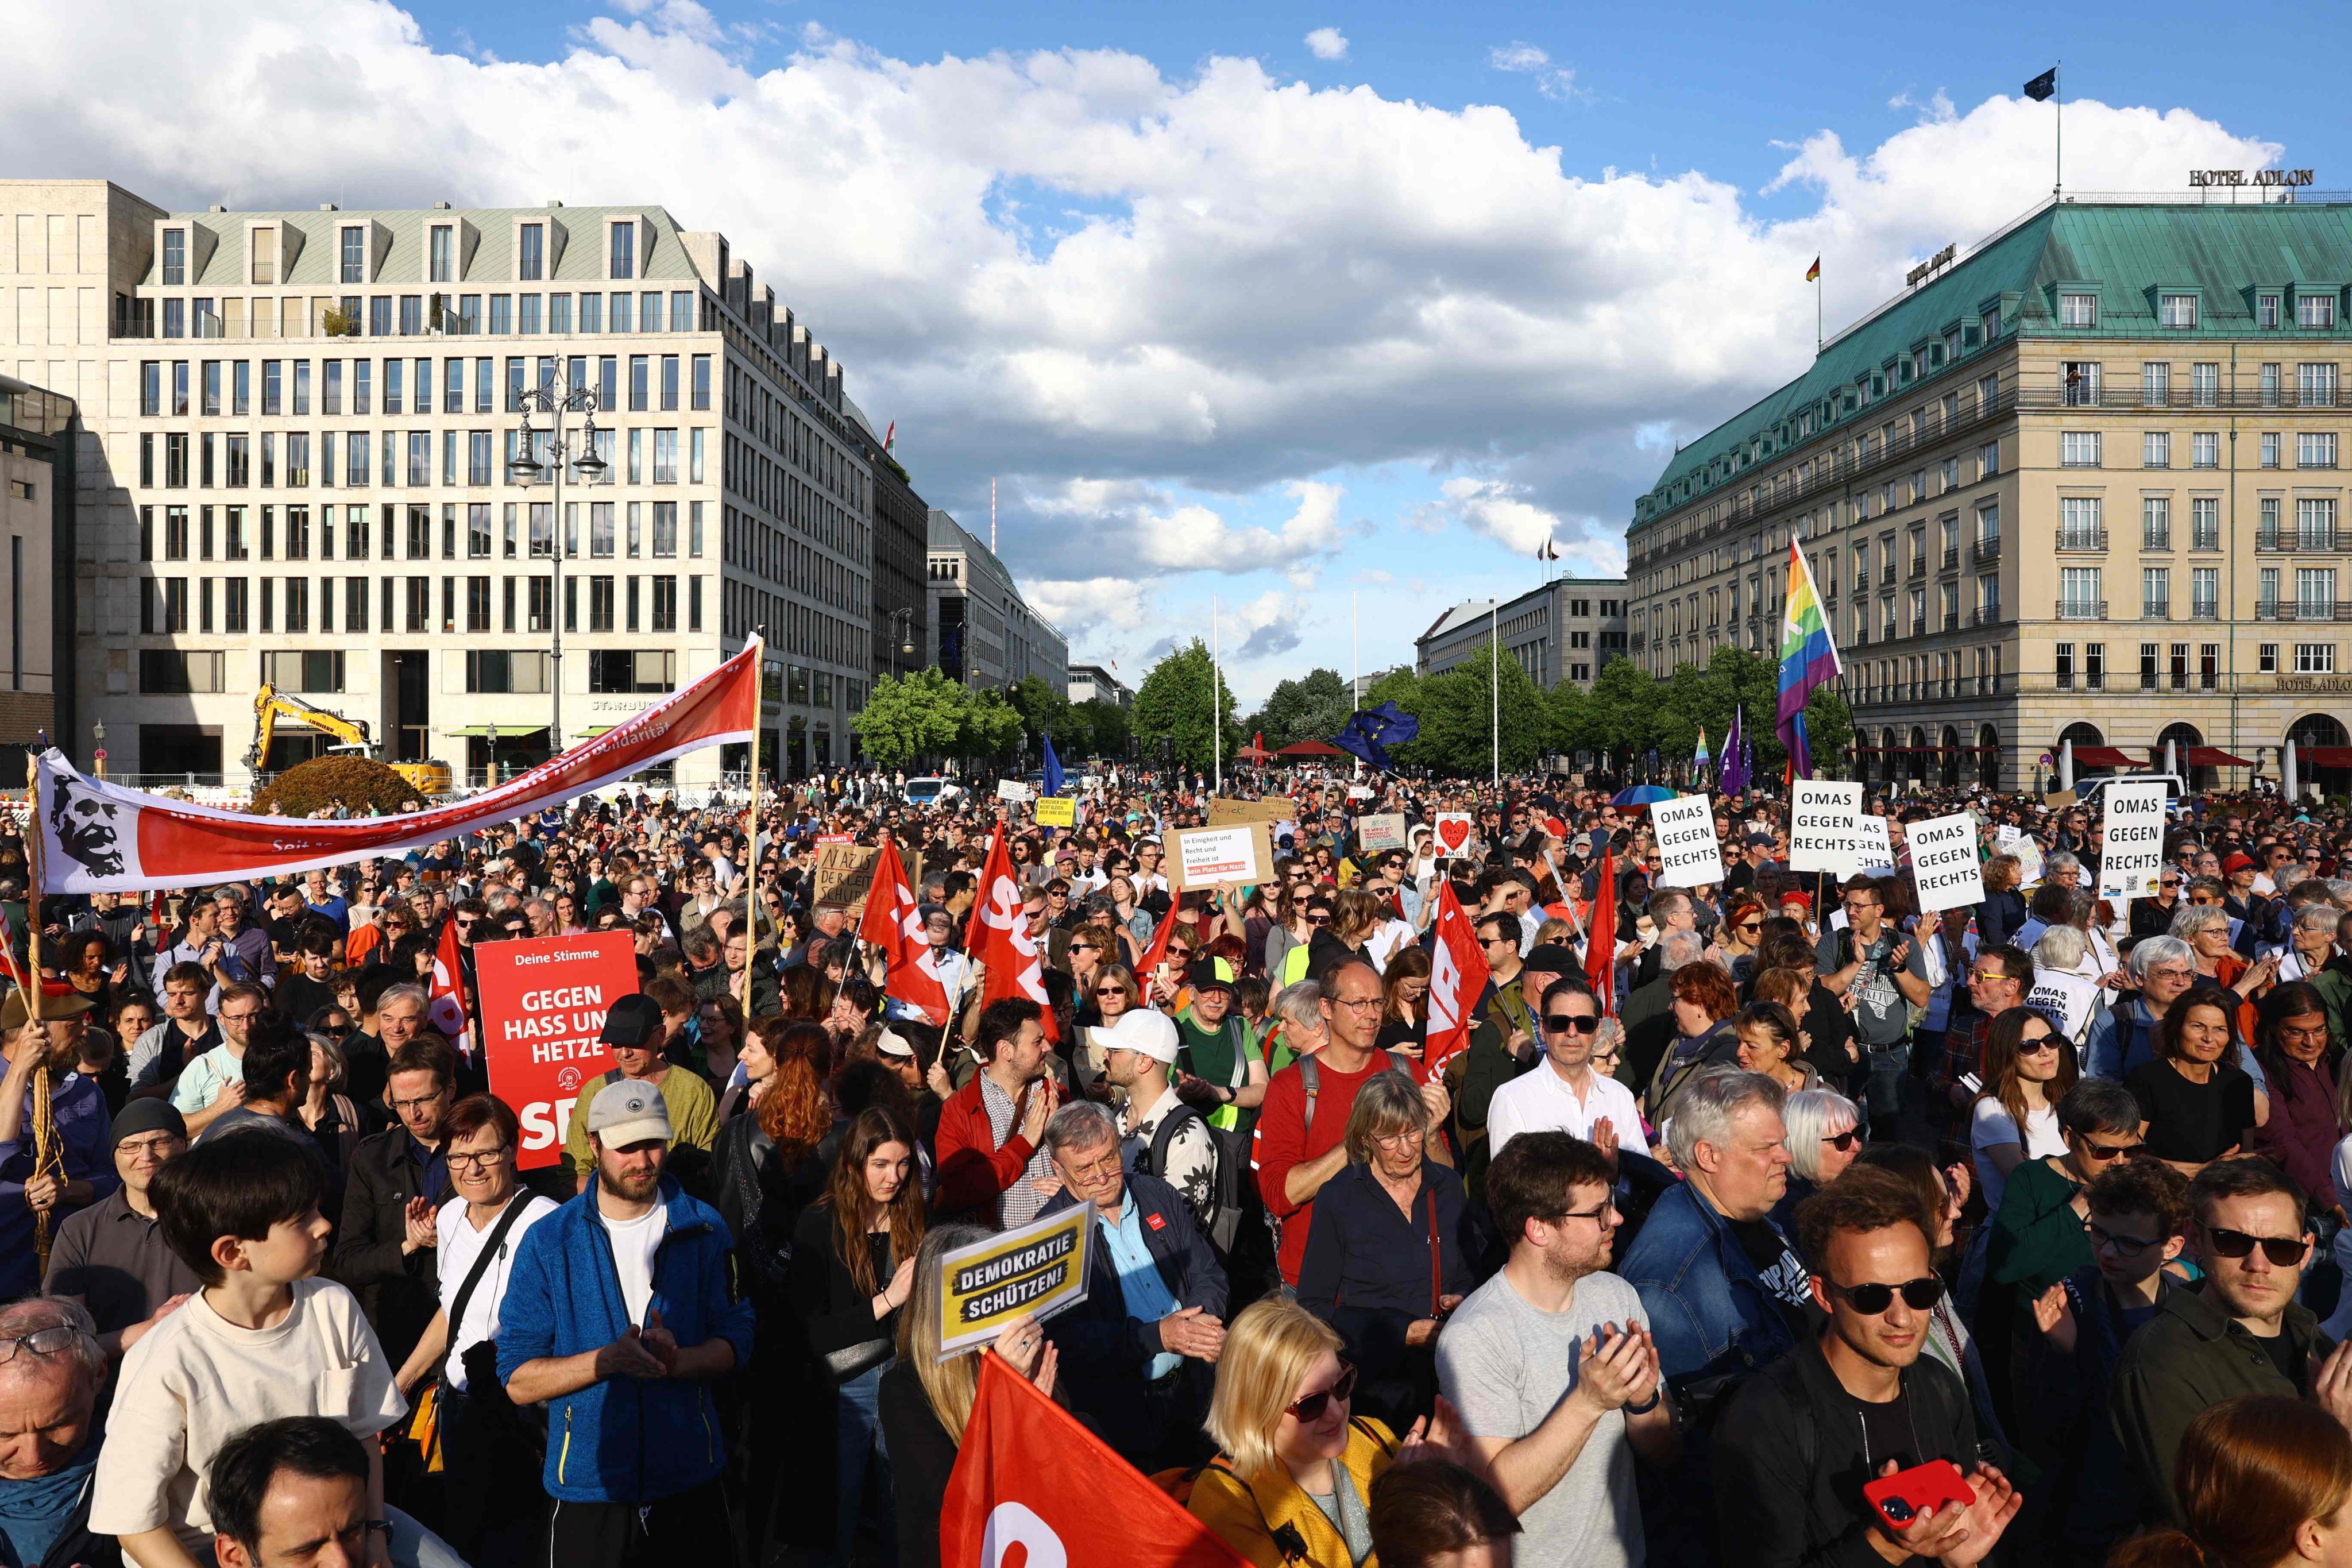 Participants gather in Berlin for a demonstration against the far right and to condemn attacks on politicians. Photo: AFP